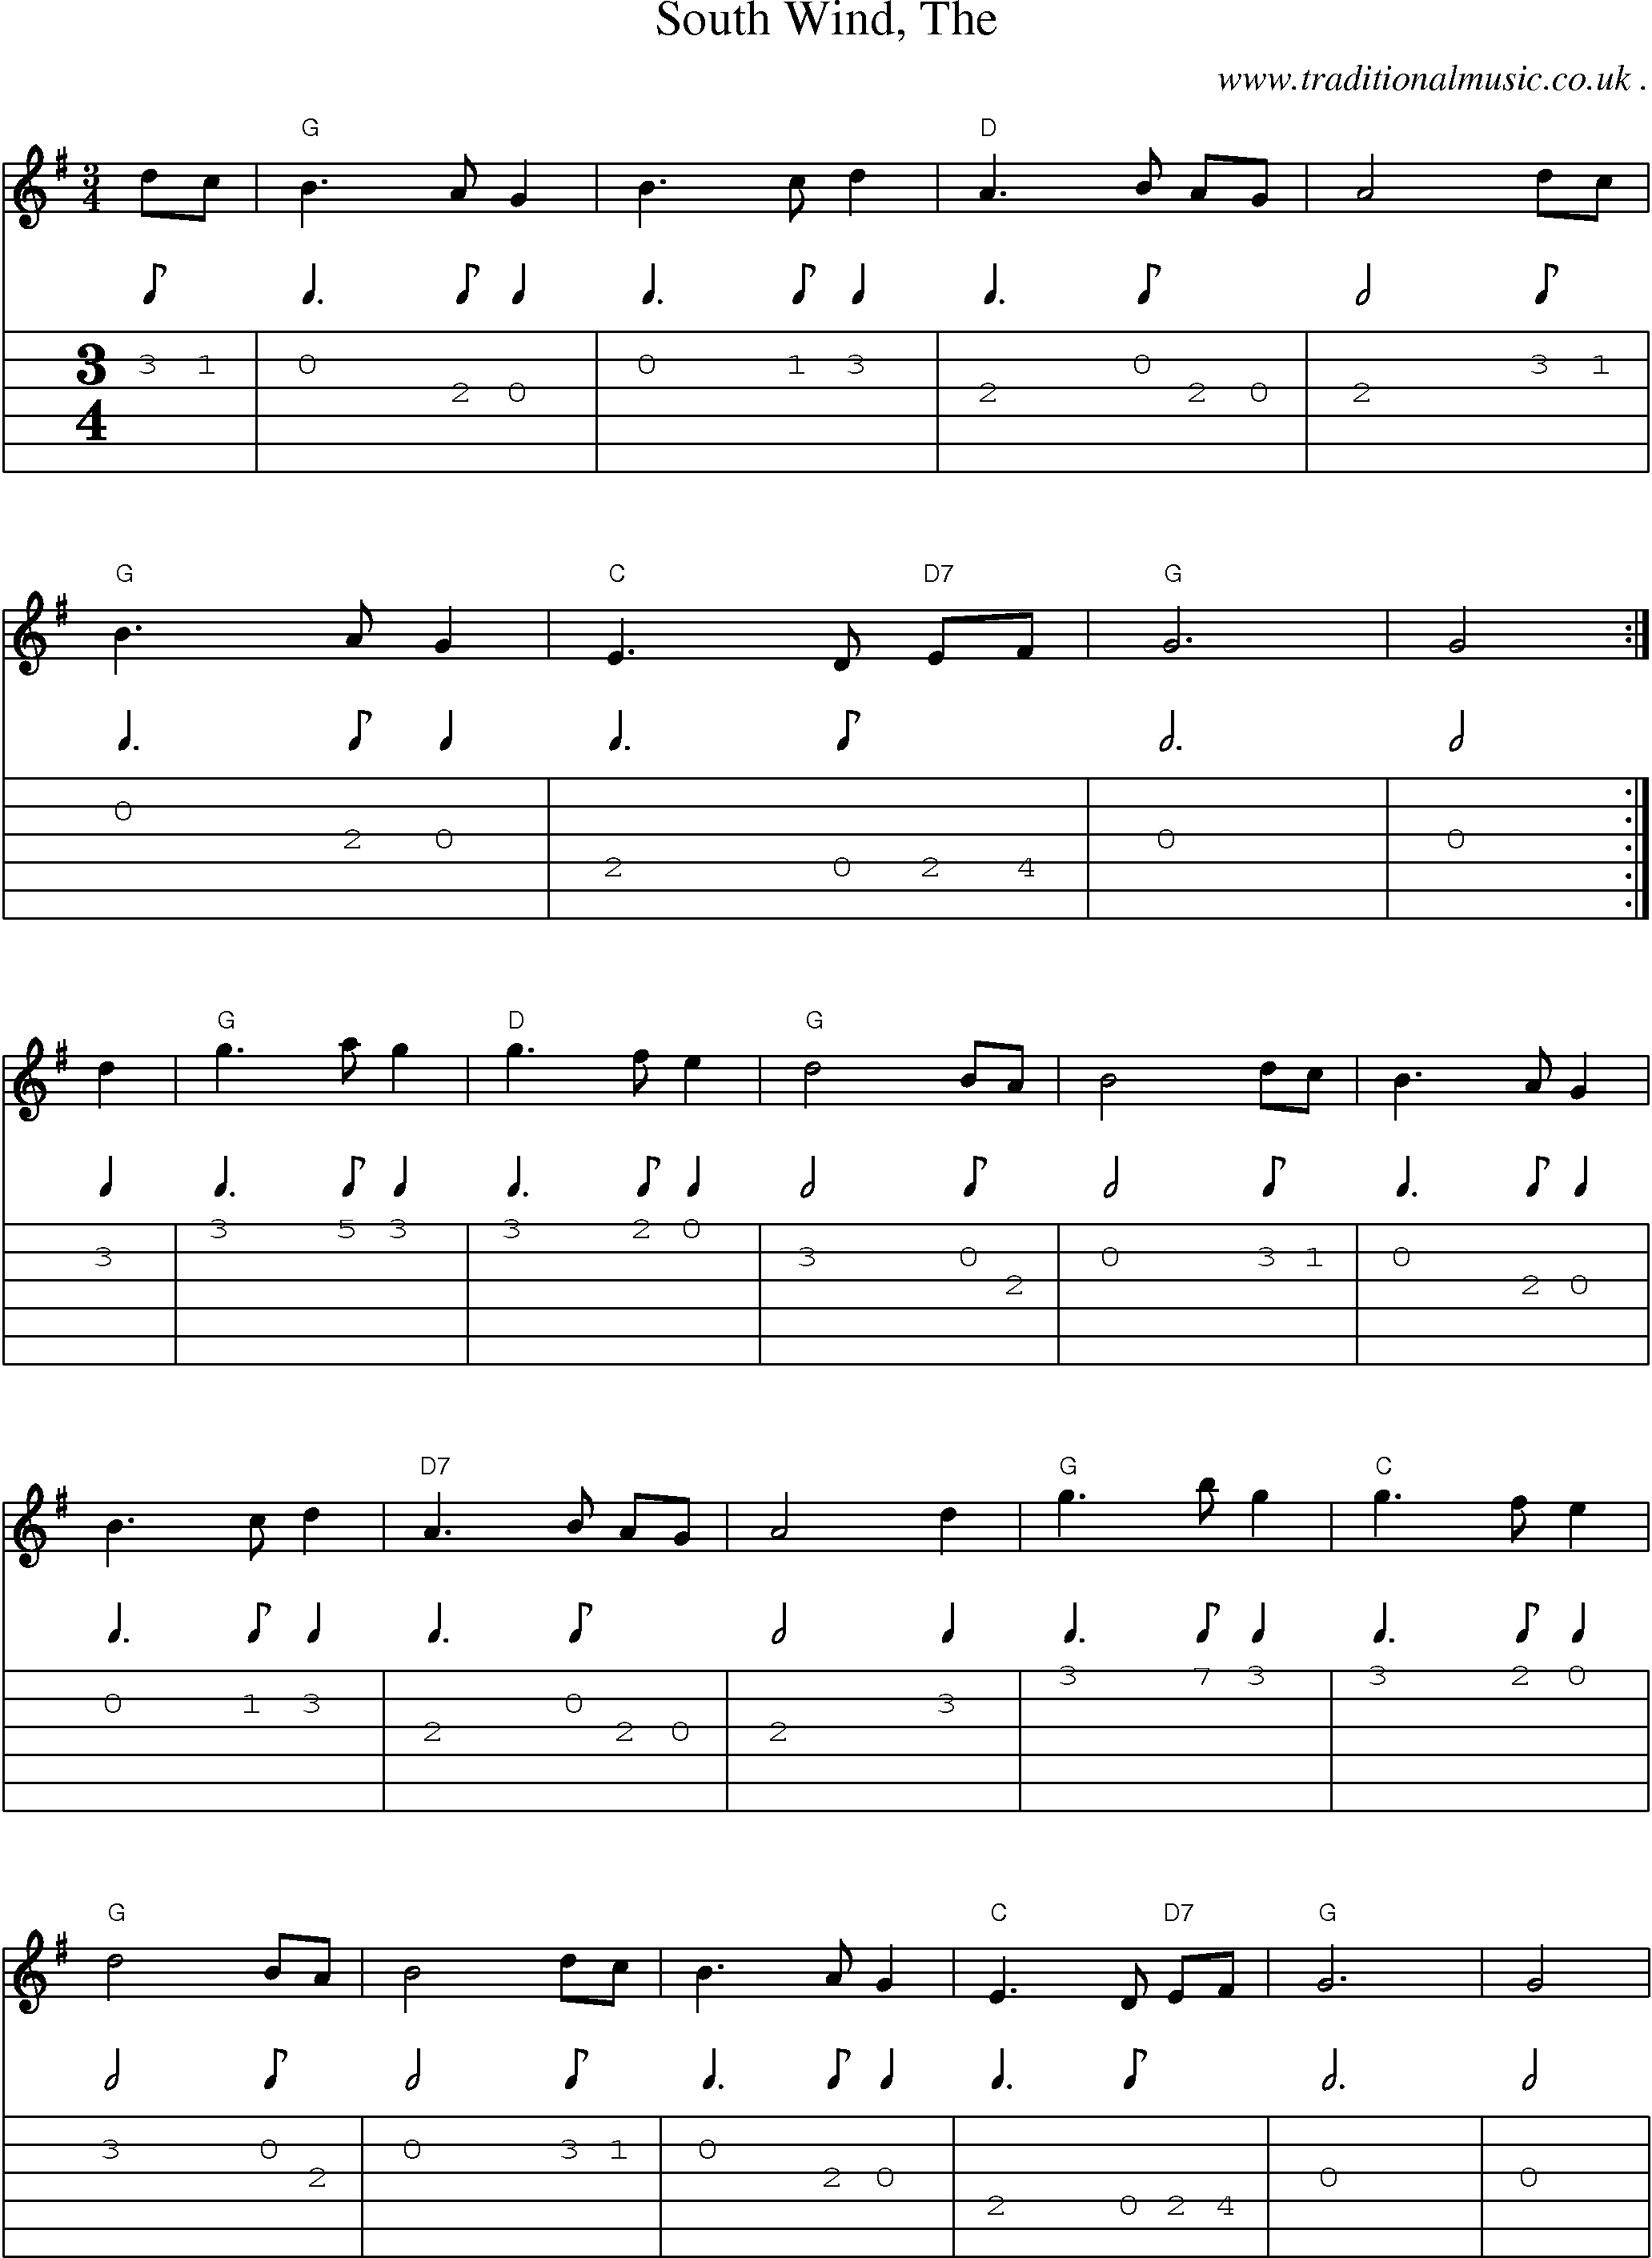 Music Score and Guitar Tabs for South Wind The